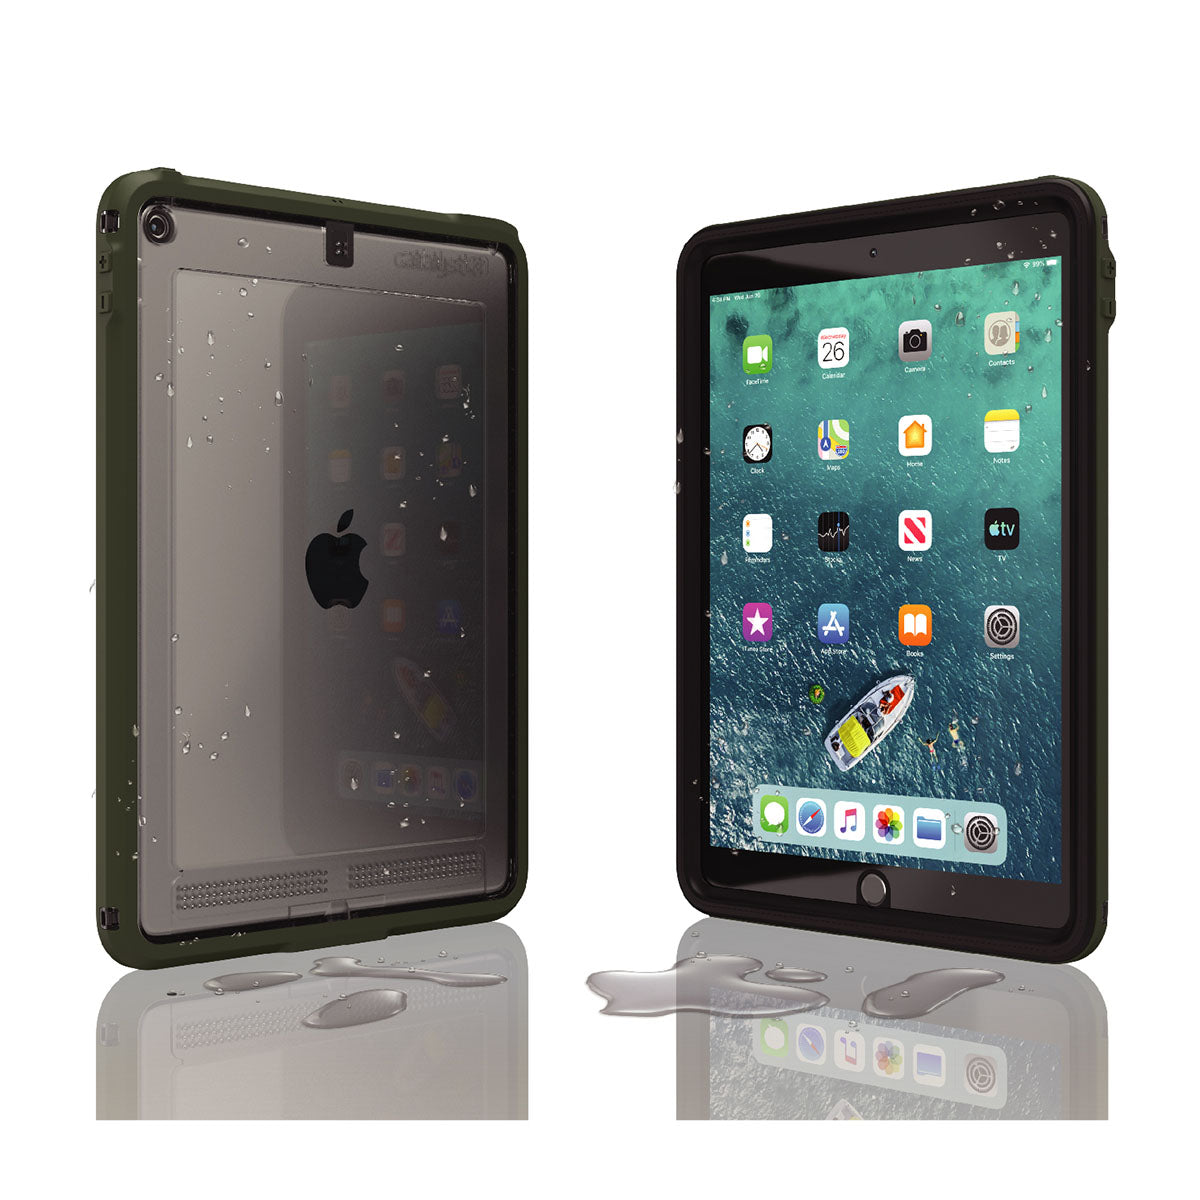 catalyst ipad air gen 3 10.5" waterproof case army green front and back view with water droplets